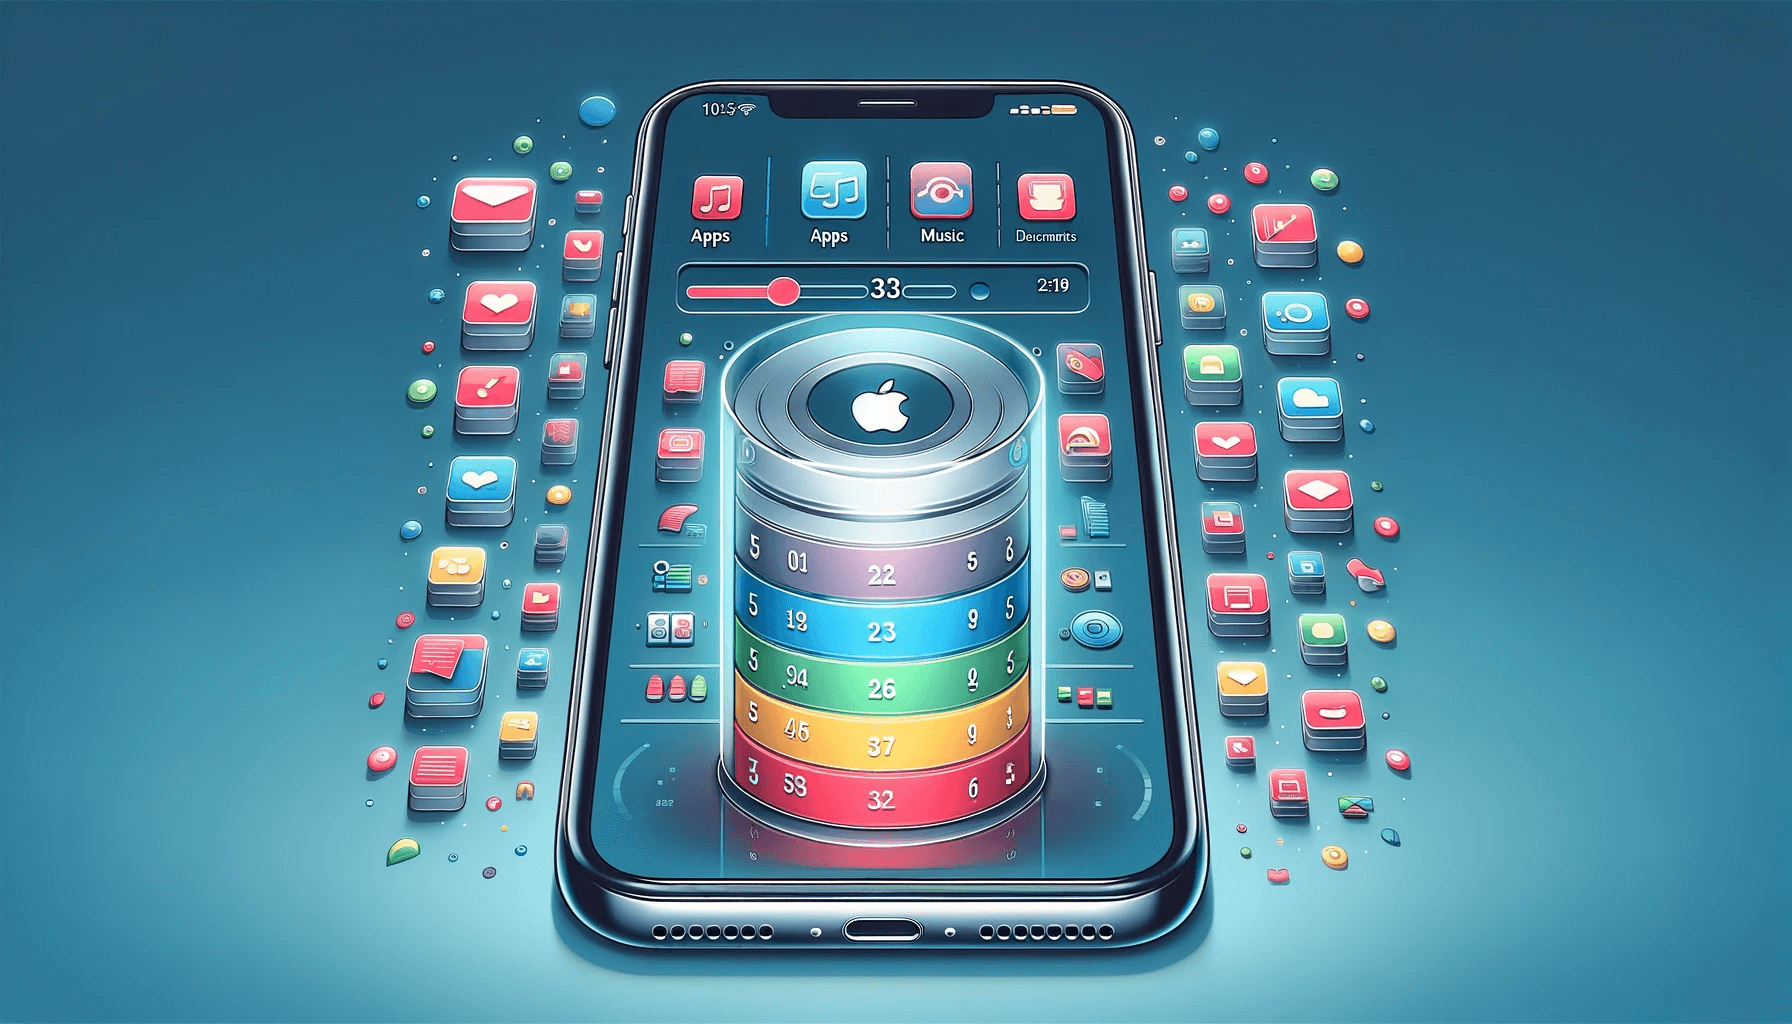 DALL·E 2023 11 16 17.00.19 A digital illustration showing the concept of iPhone storage. The image features an iPhone in the center with a clear high resolution screen displayi